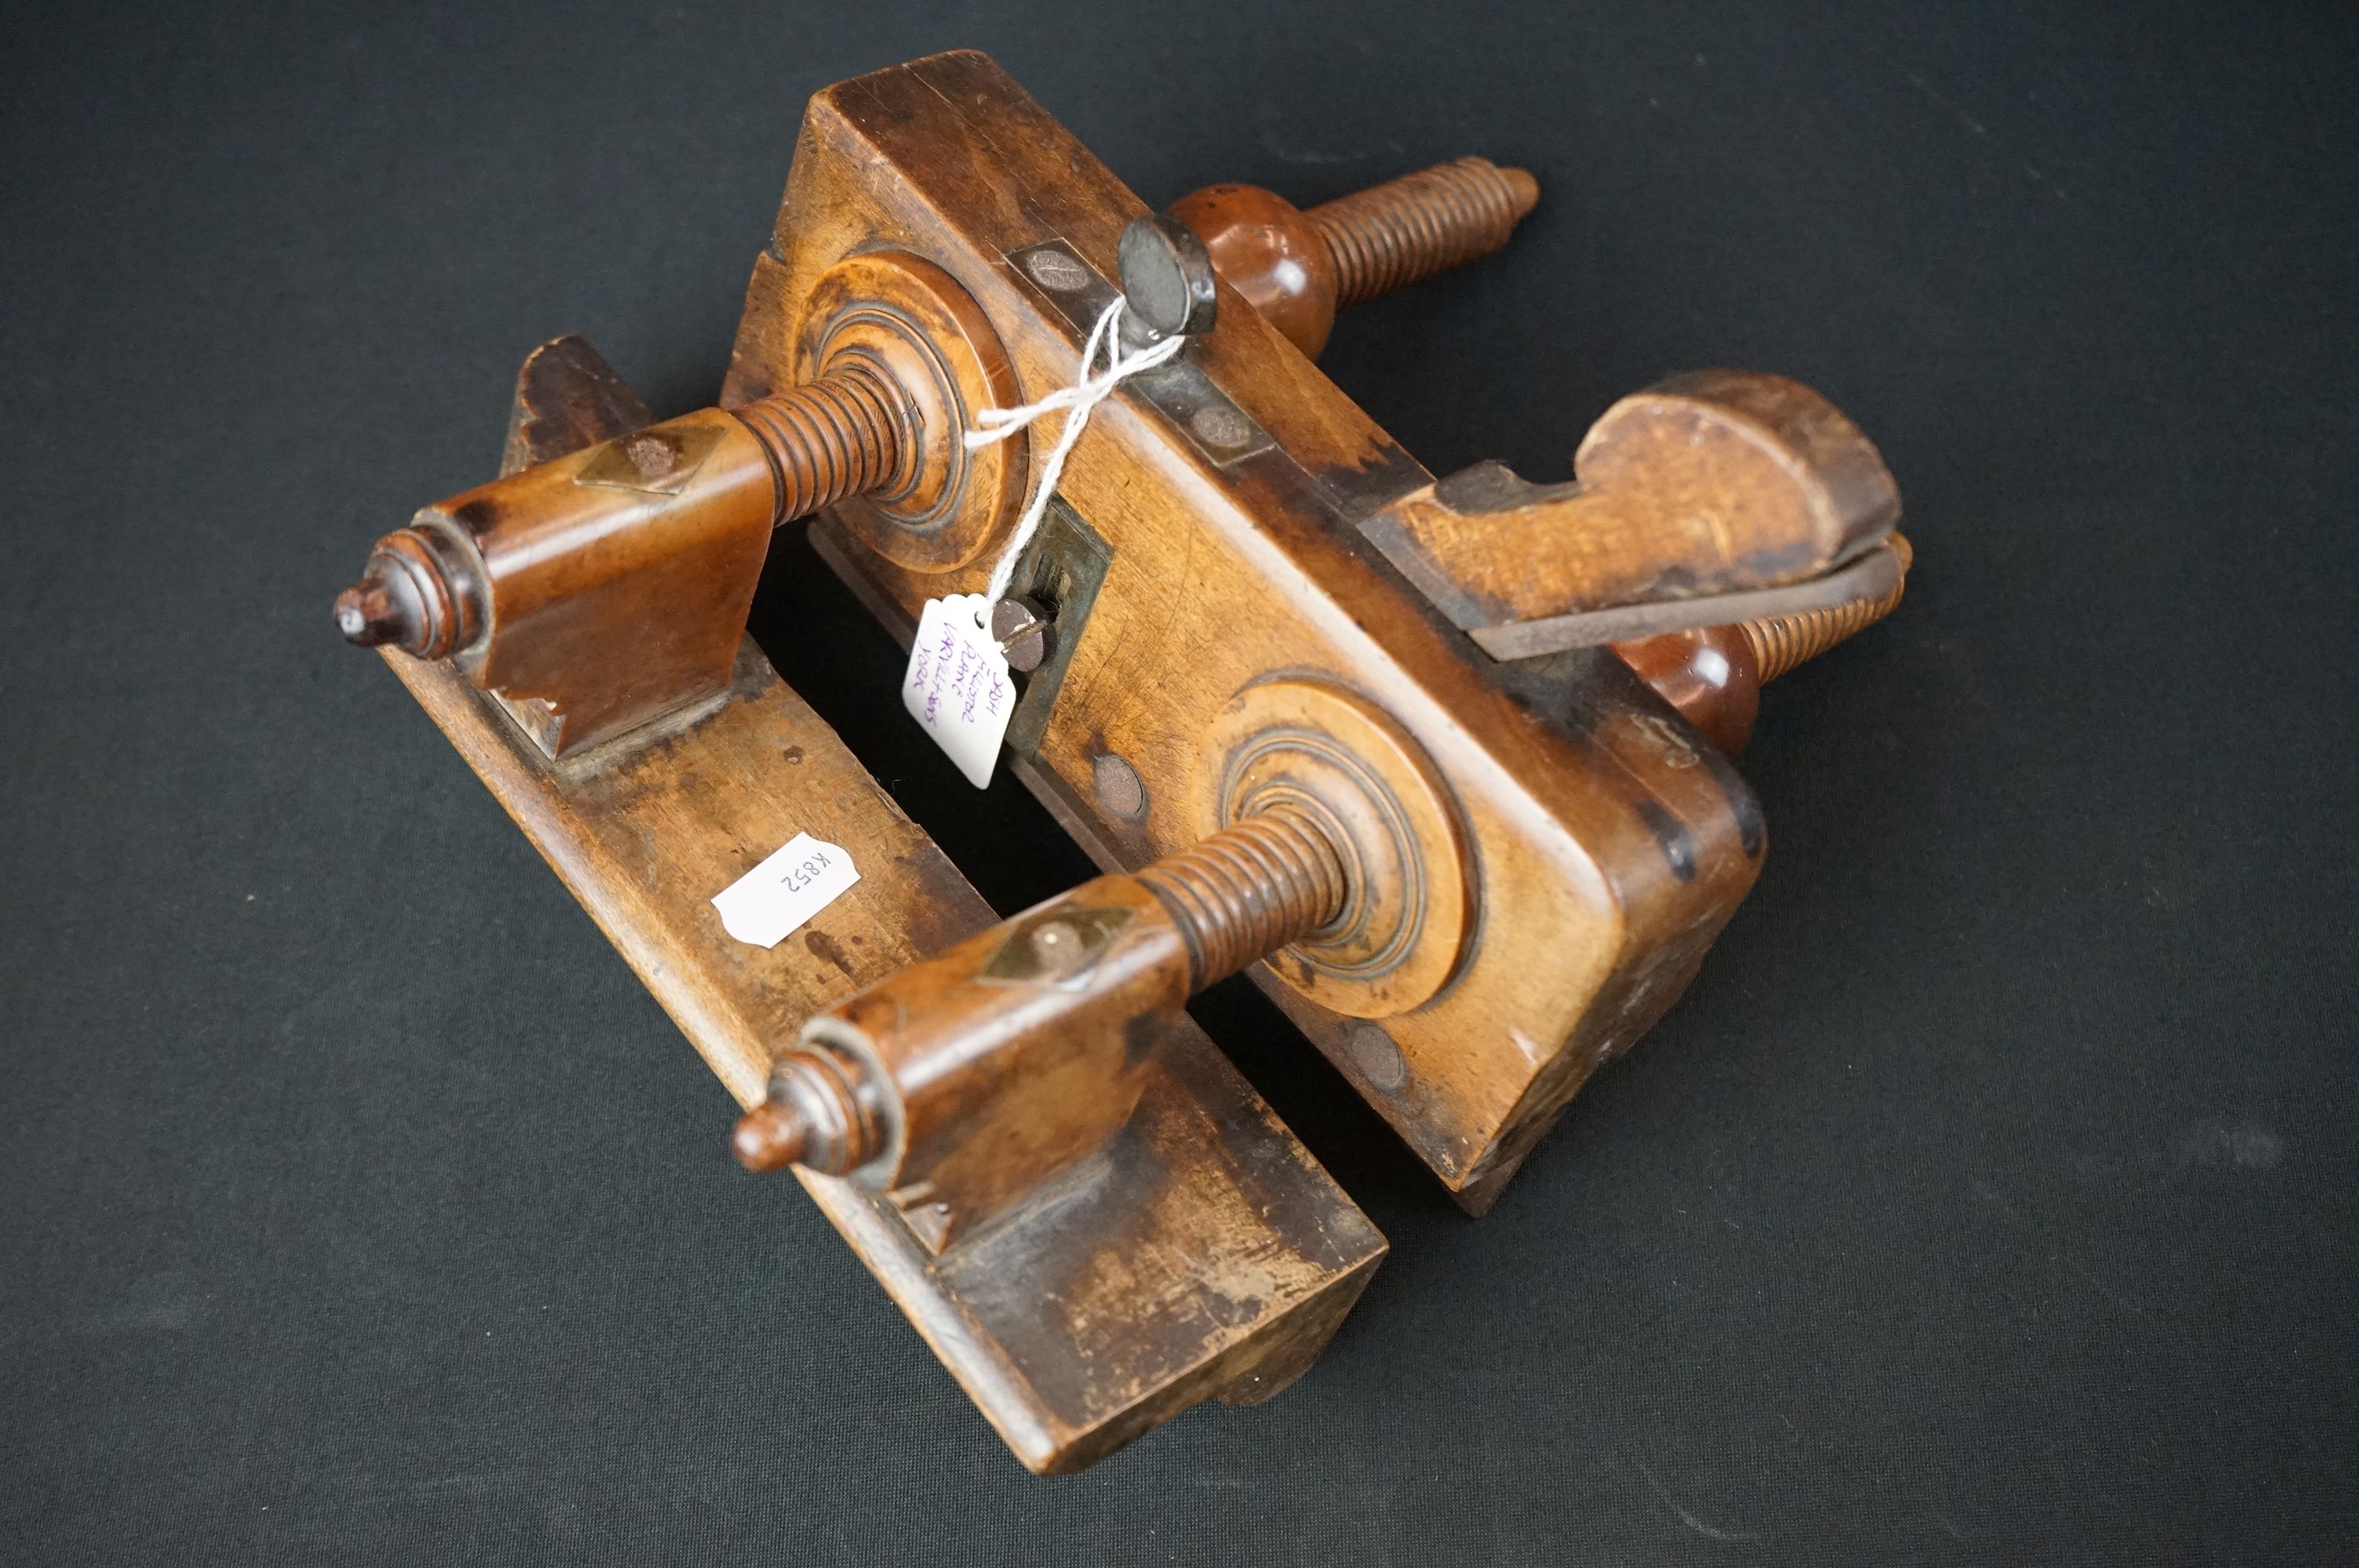 Late 19th century Wooden Sash Fillister Plane by Varville and Sons of York together with a 16" Beech - Image 4 of 6